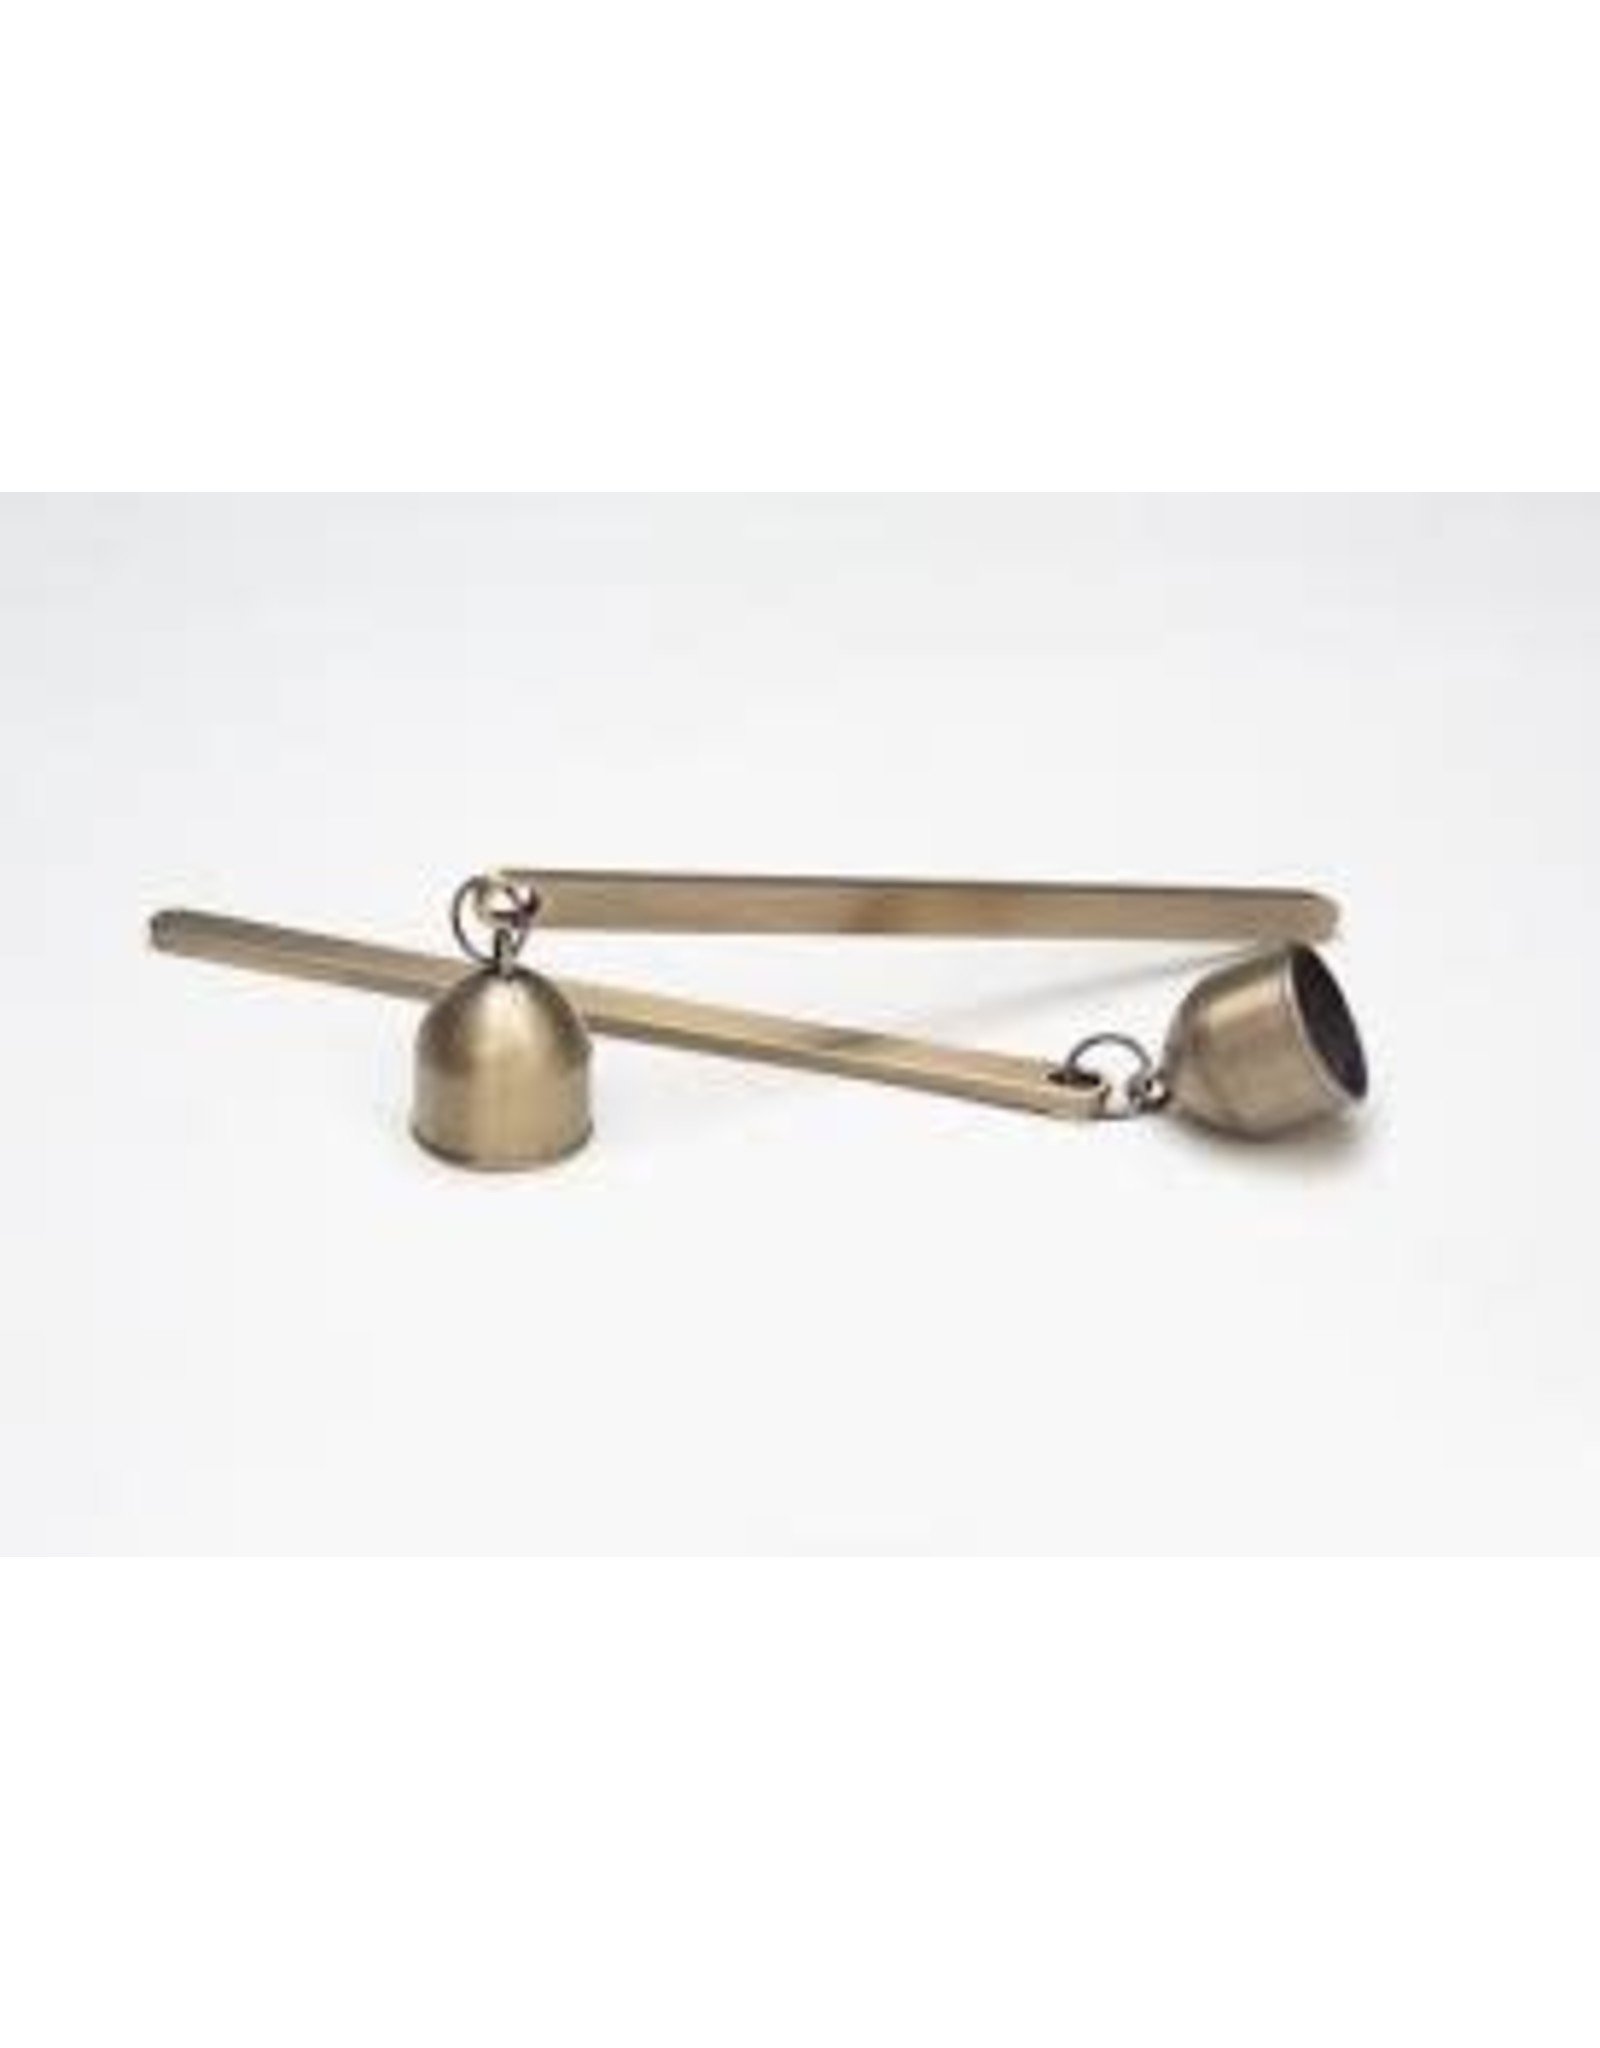 The Roosevelts Candle Co. Candle Snuffer